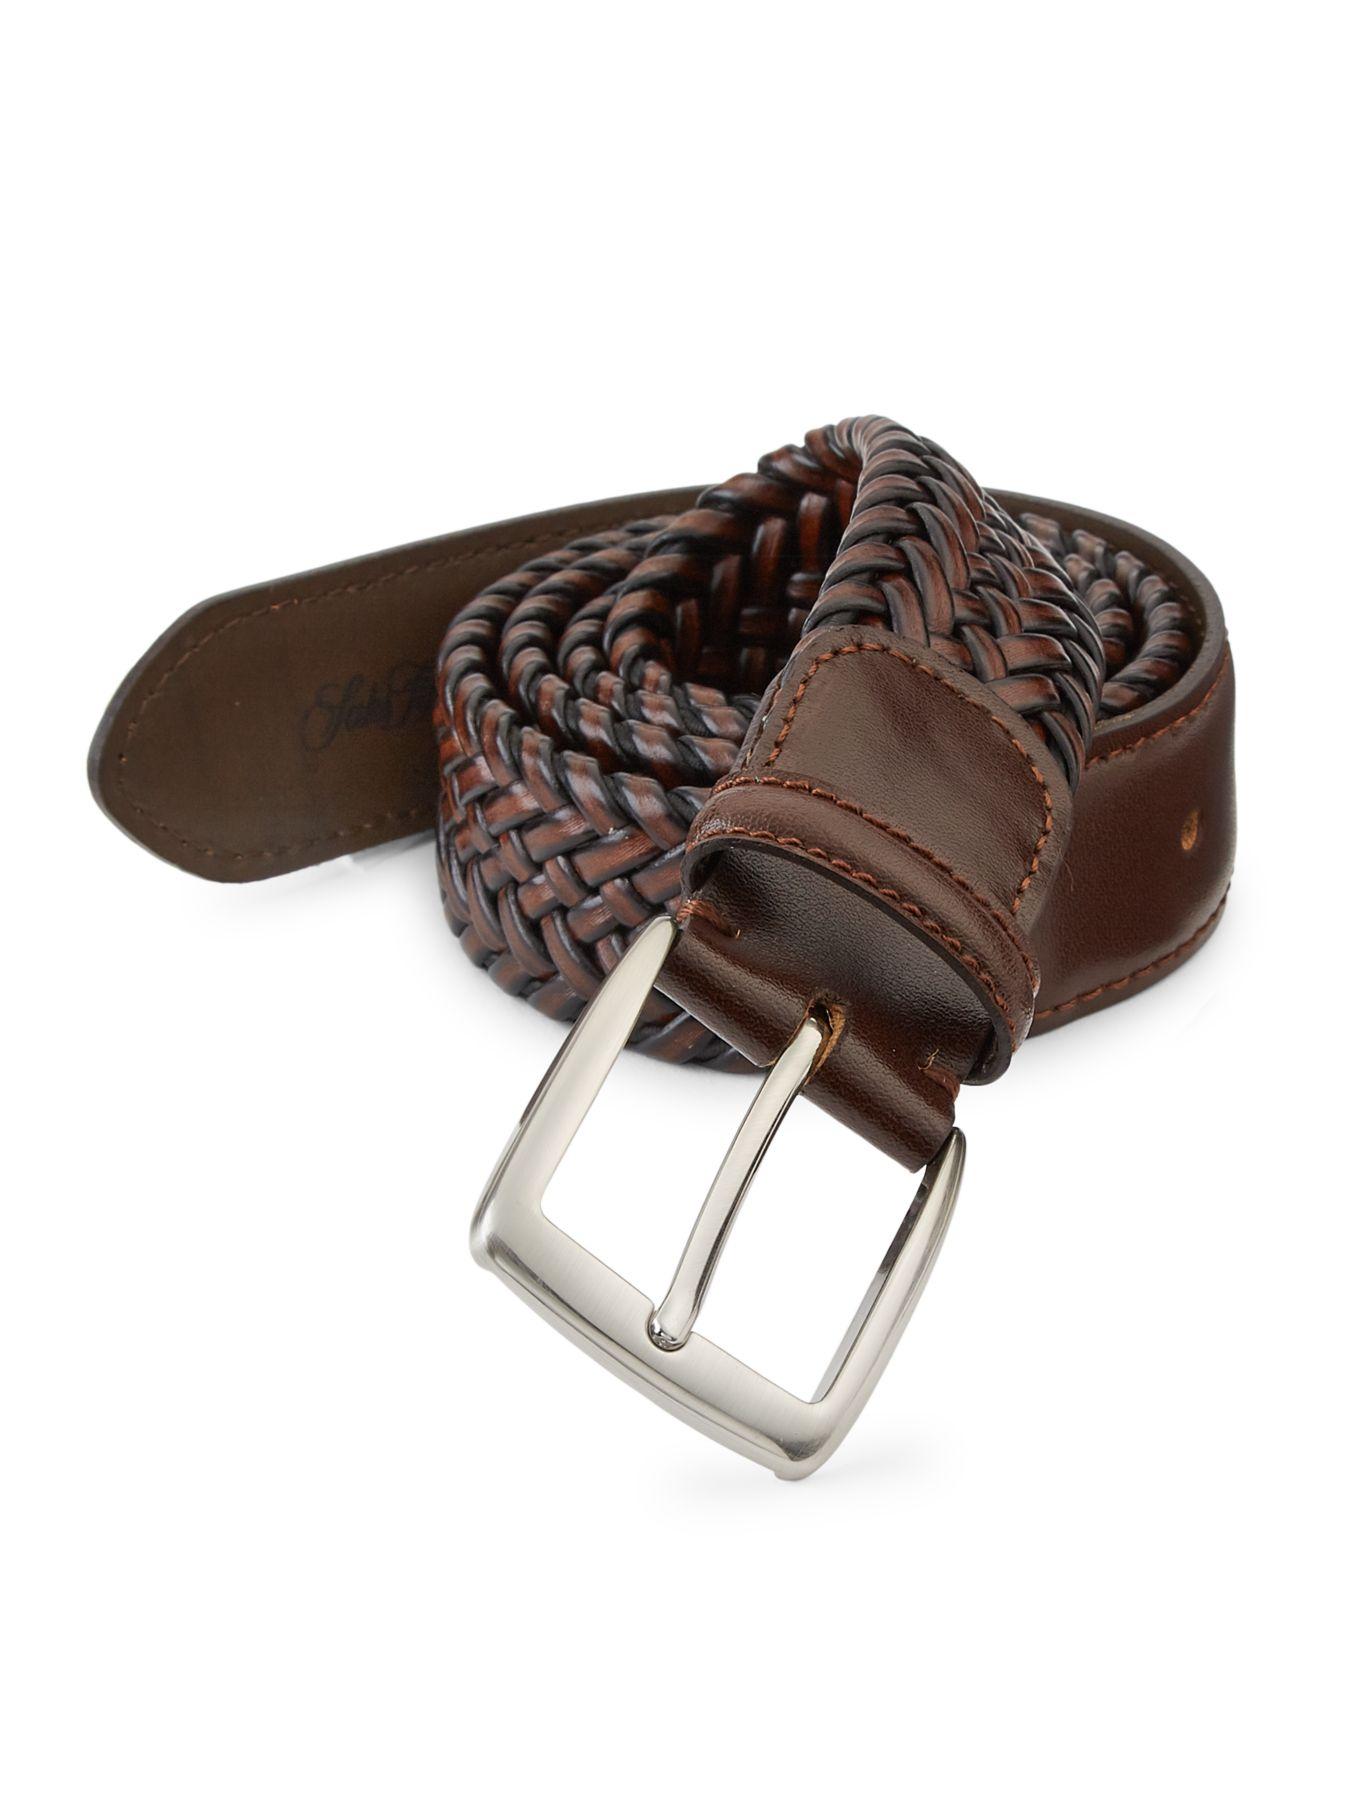 Saks Fifth Avenue Collection Braided Burnished Leather Belt in Brown for Men - Lyst